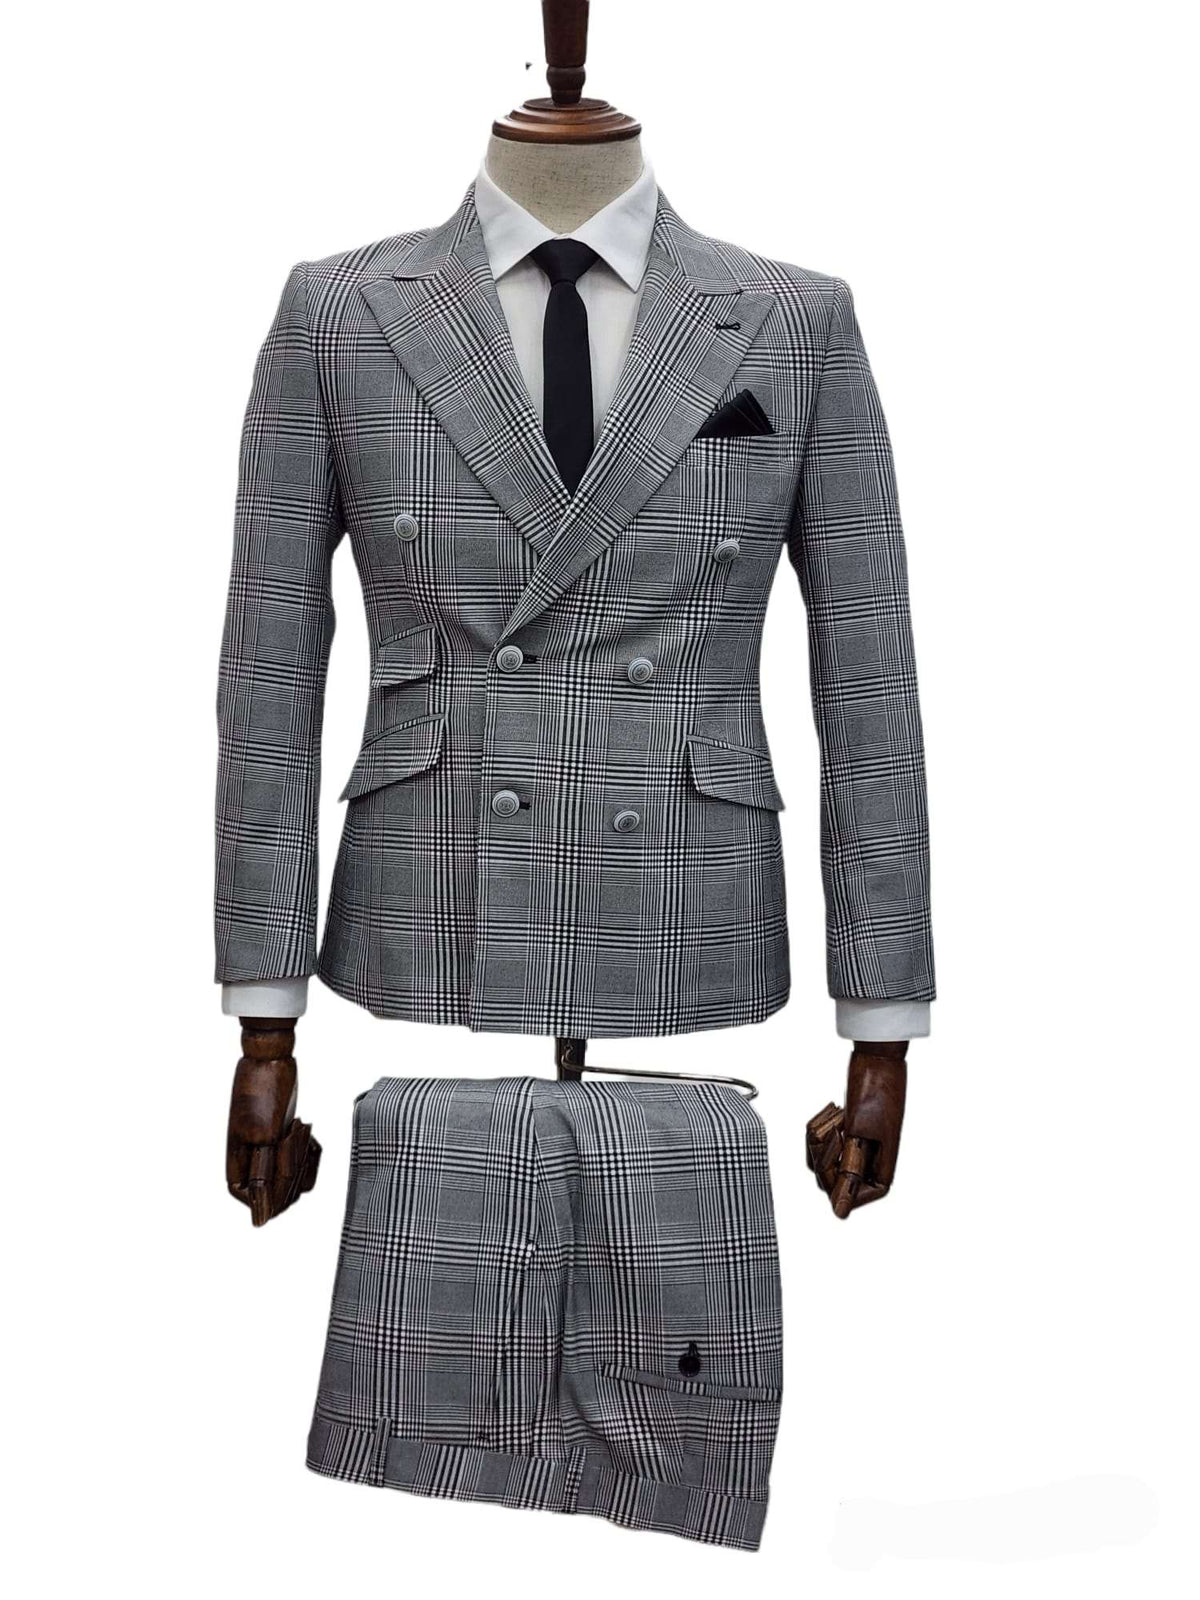 Giovanni Testi Slim Fit Double Breasted Suit GT6DB-1251 Black/WHITE/PLAID